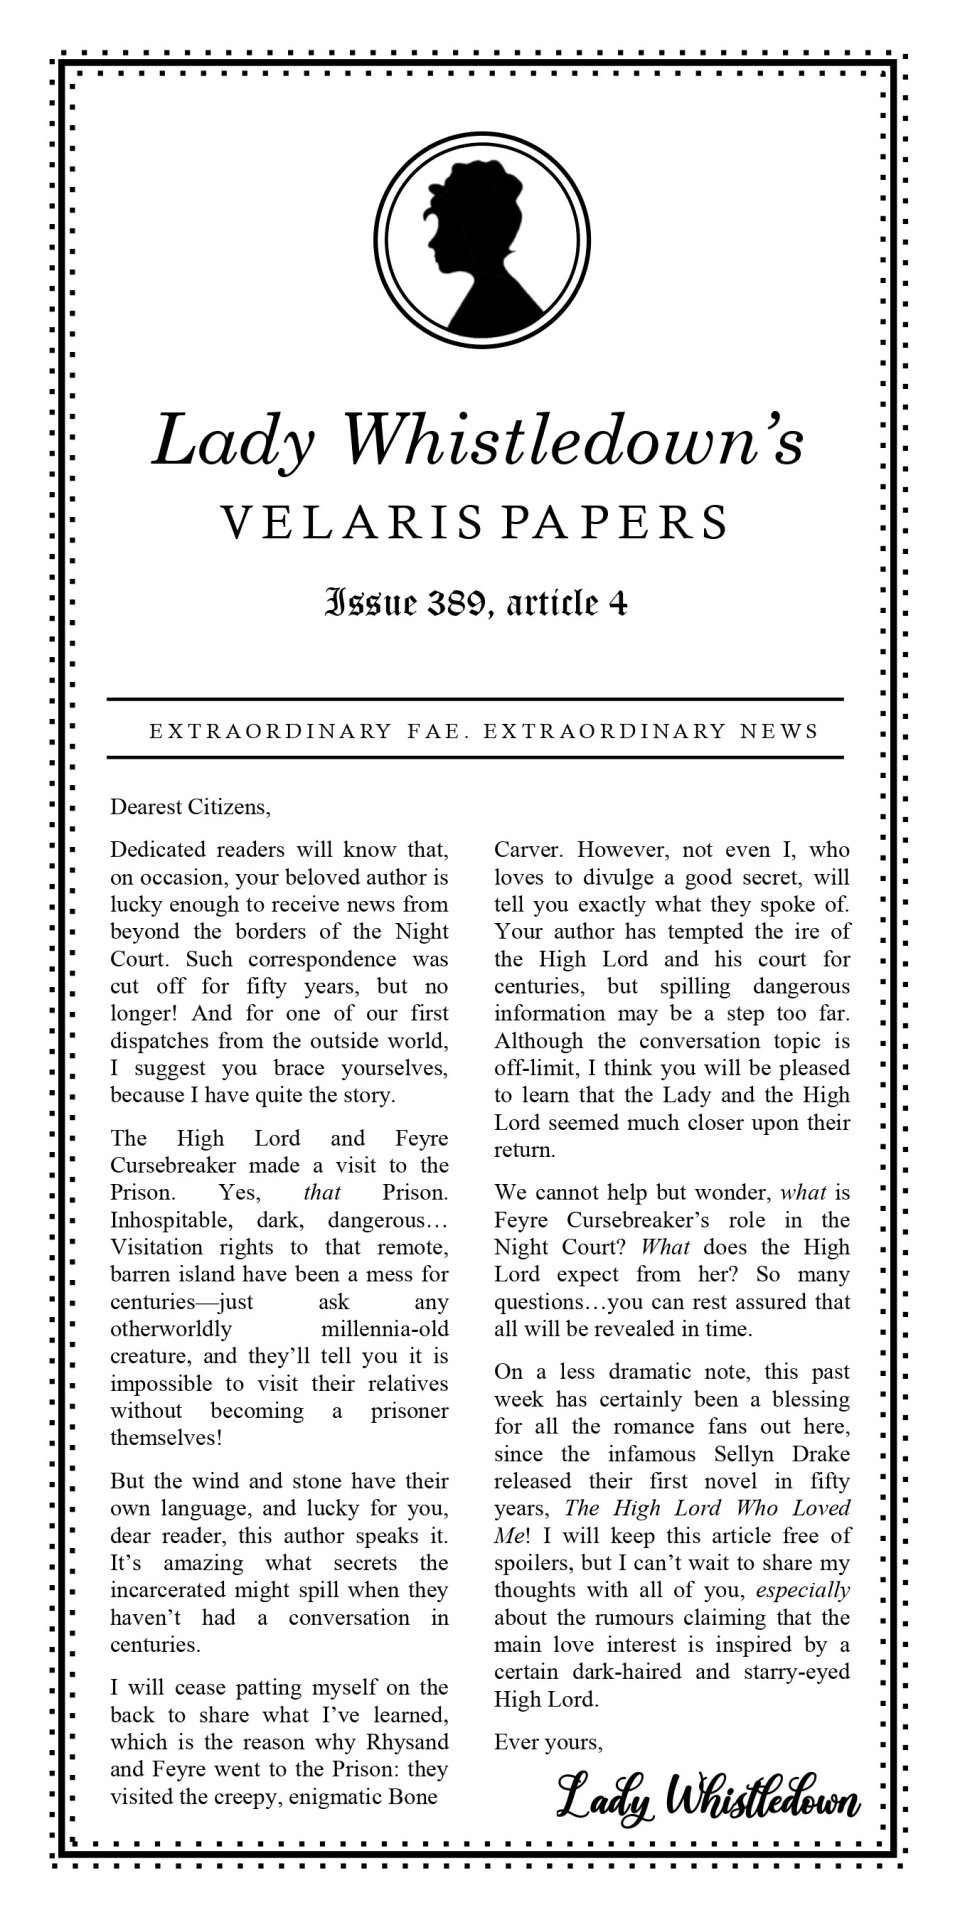 velaris-papers-lady-whistledown-s-velaris-papers-issue-389